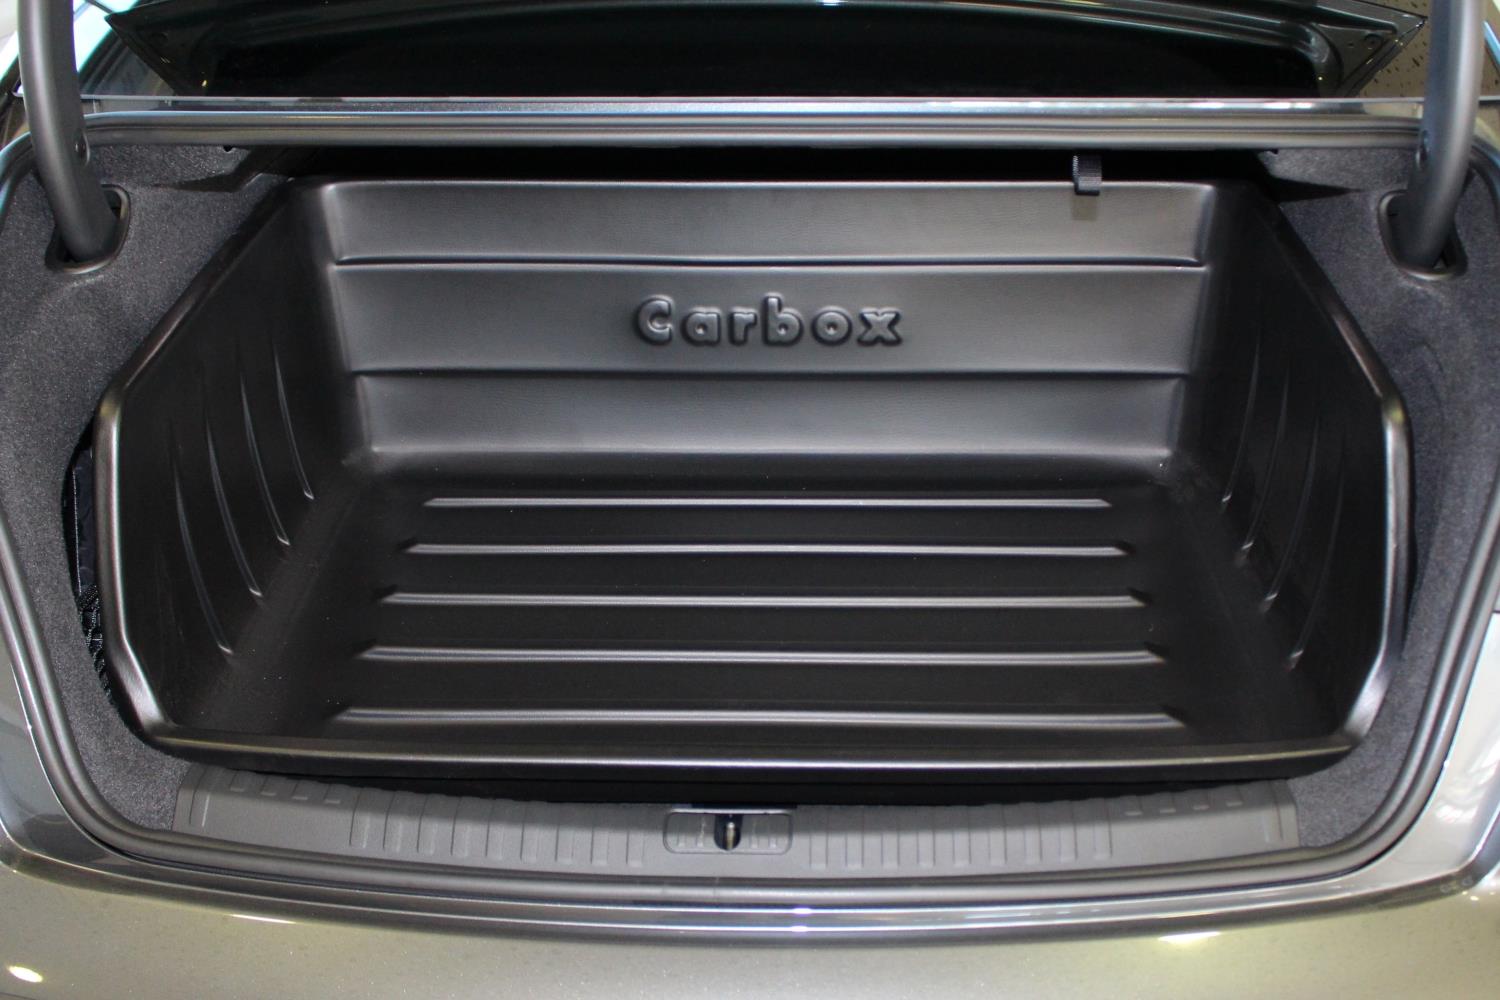 https://www.carparts-expert.com/images/stories/virtuemart/product/aud11a6cc-audi-a6-c8-2018-4-door-saloon-carbox-classic-yoursize-high-sided-boot-liner-1.jpg